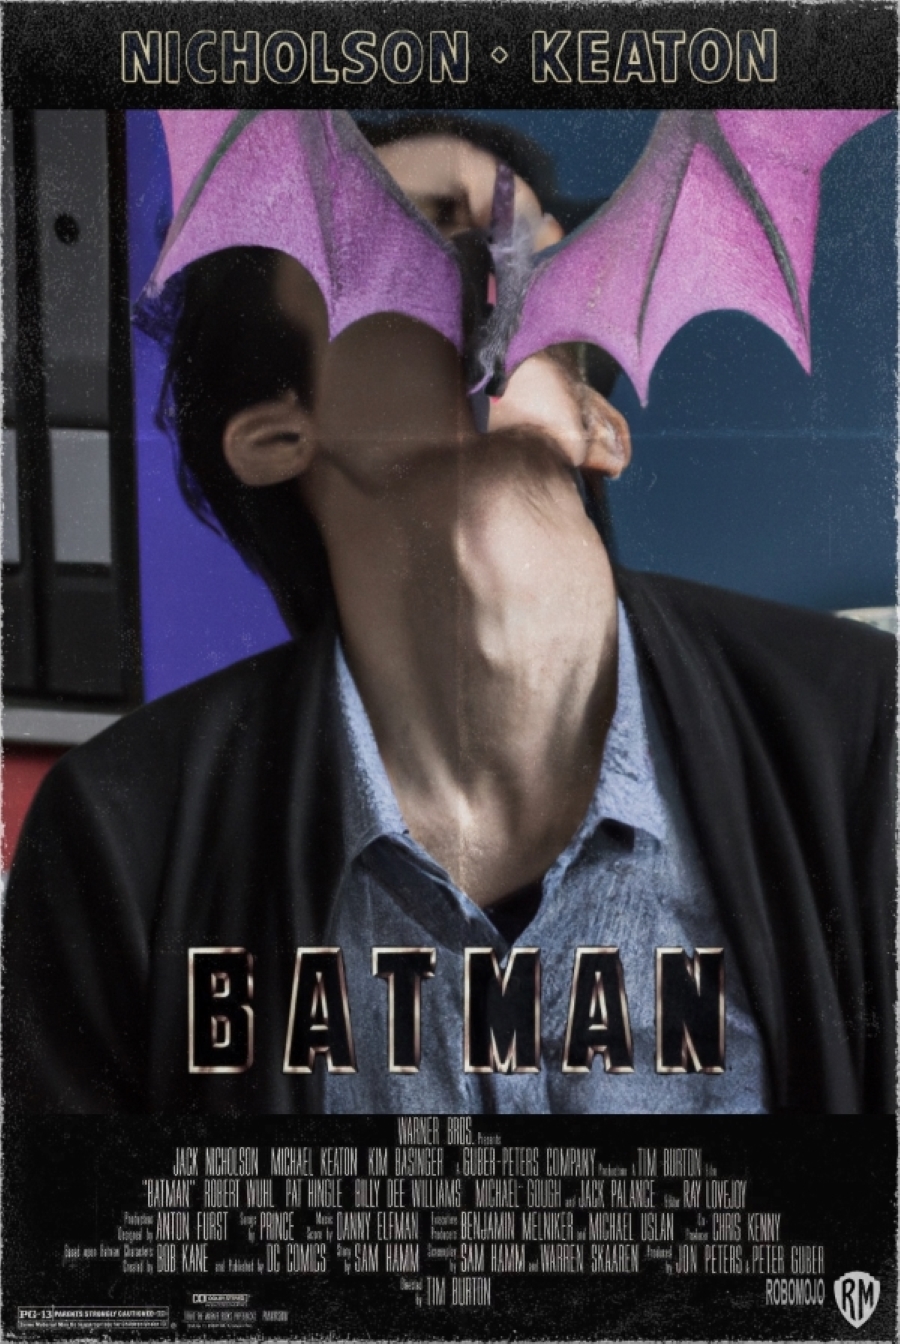 An artificial intelligence-generated movie poster of Batman showing a man swallowing a purple bat.